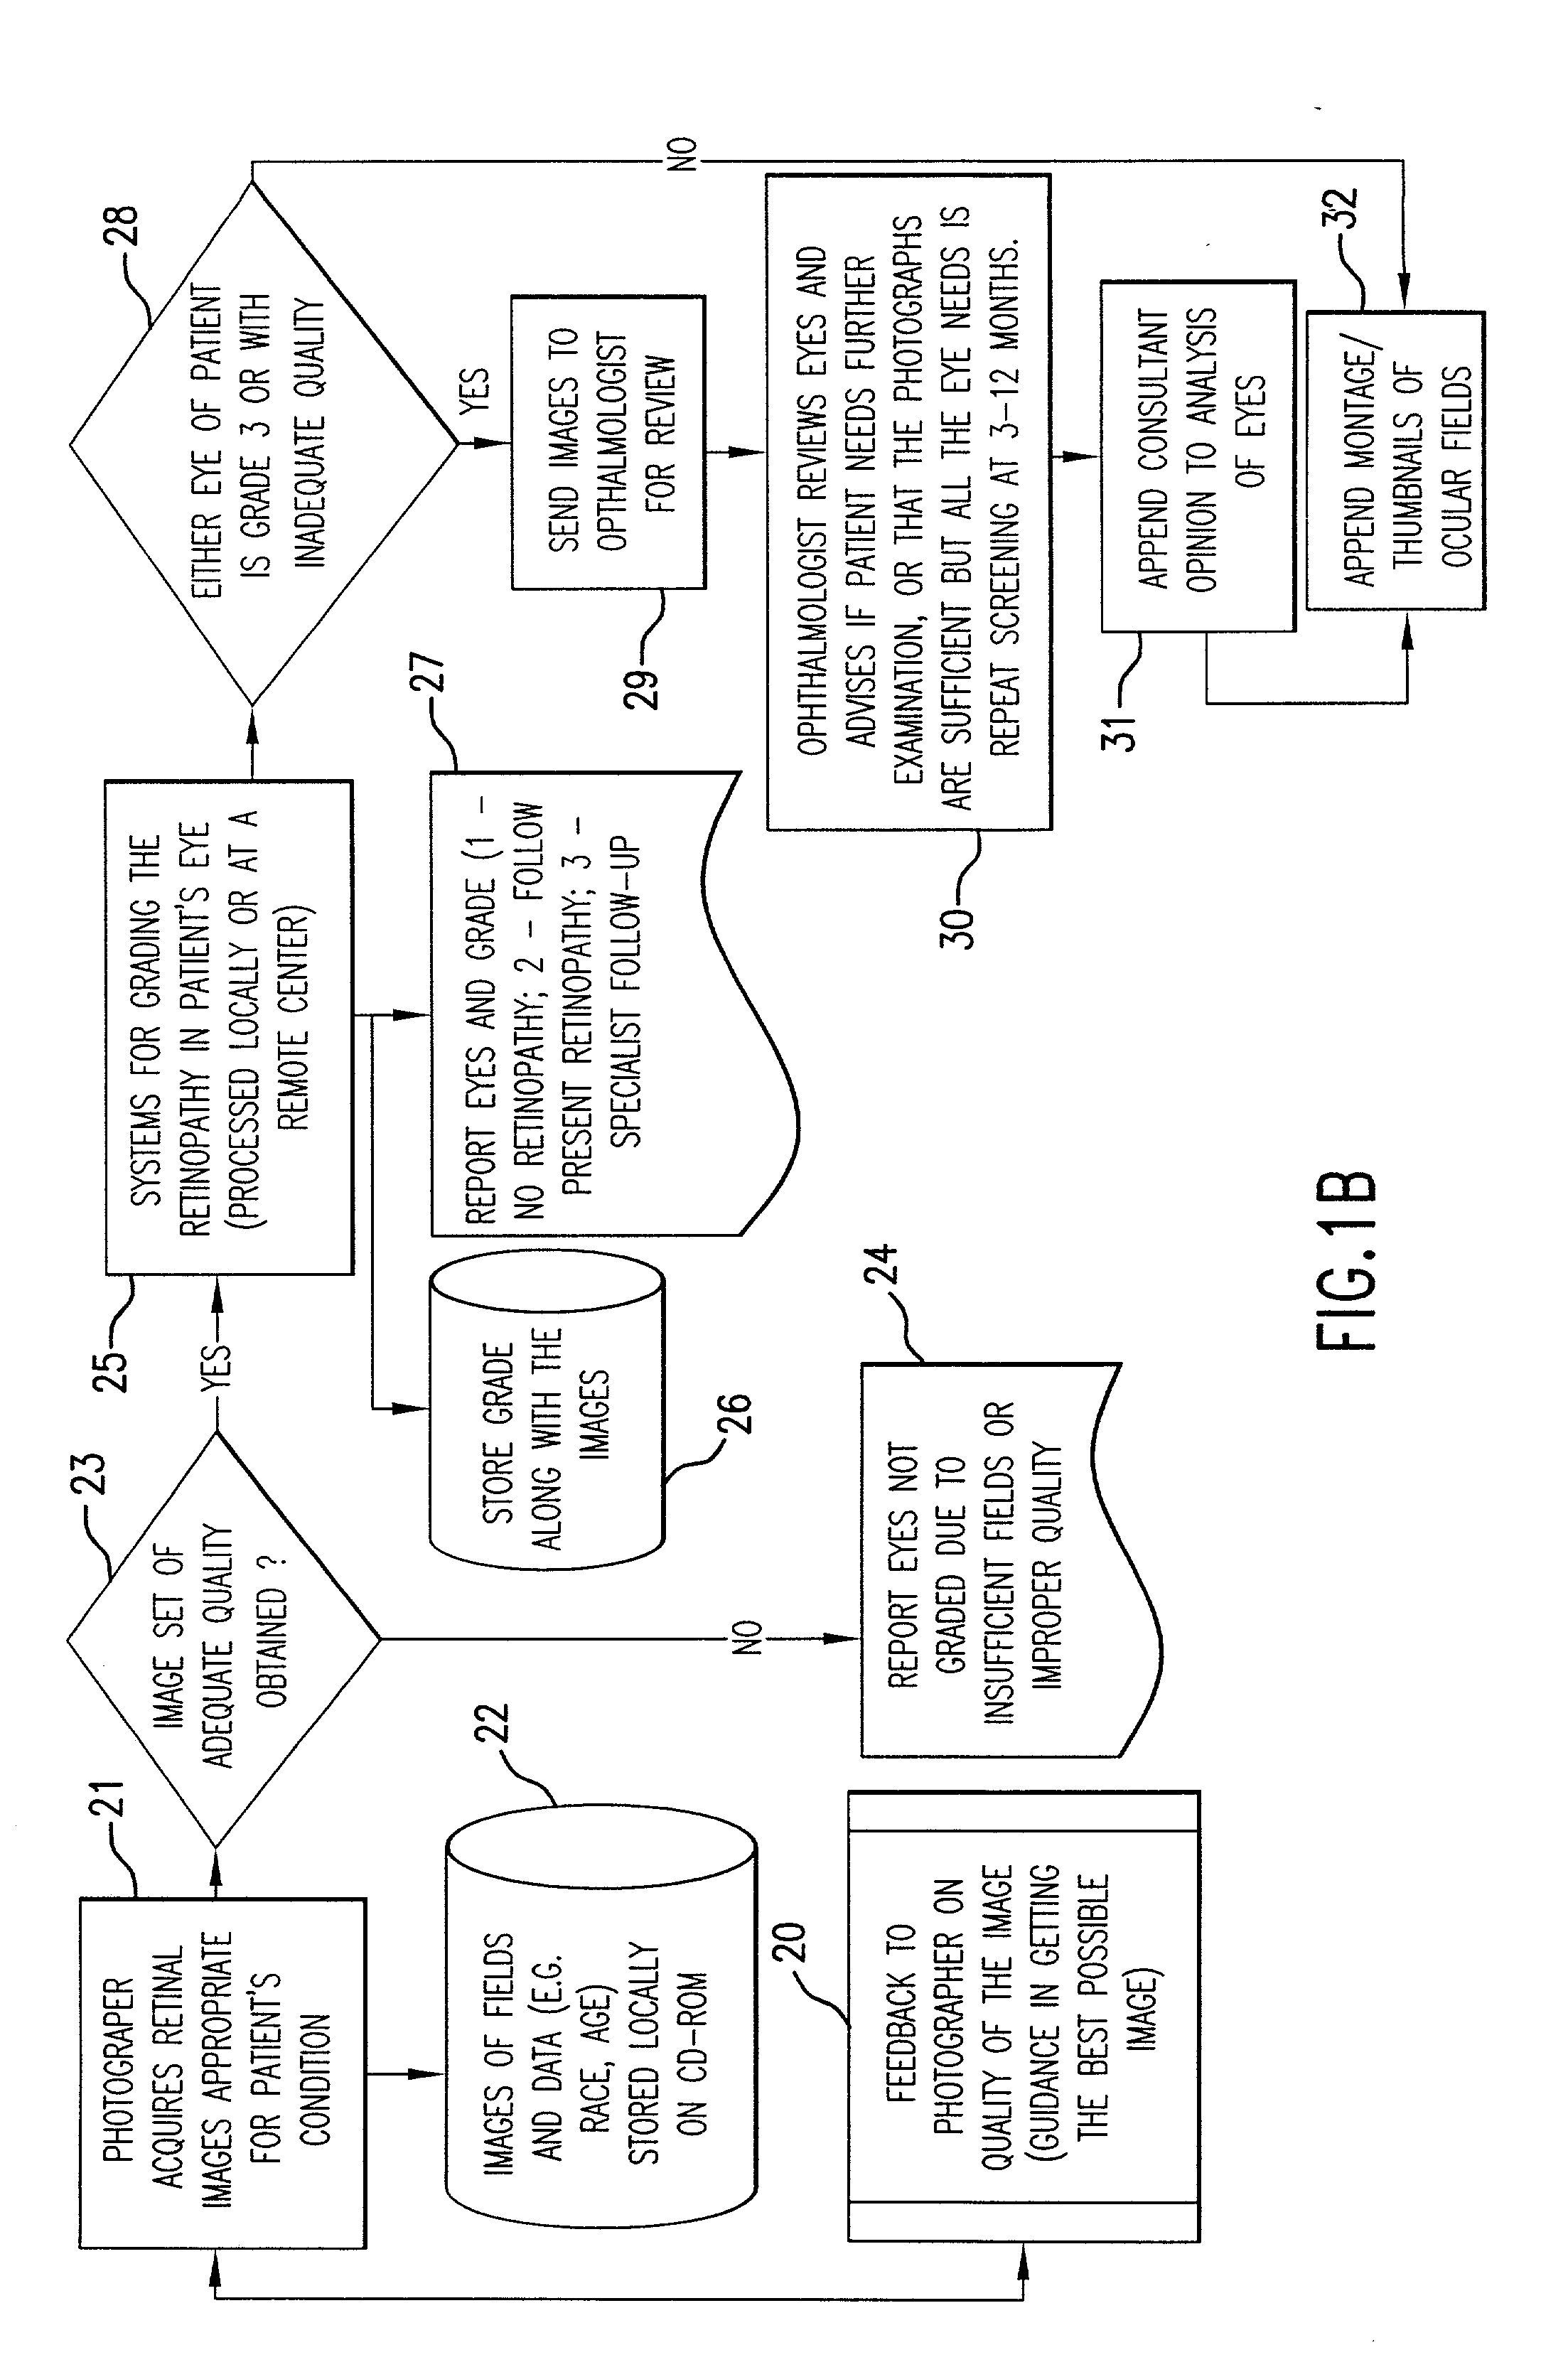 Systems and methods for tele-ophthalmology